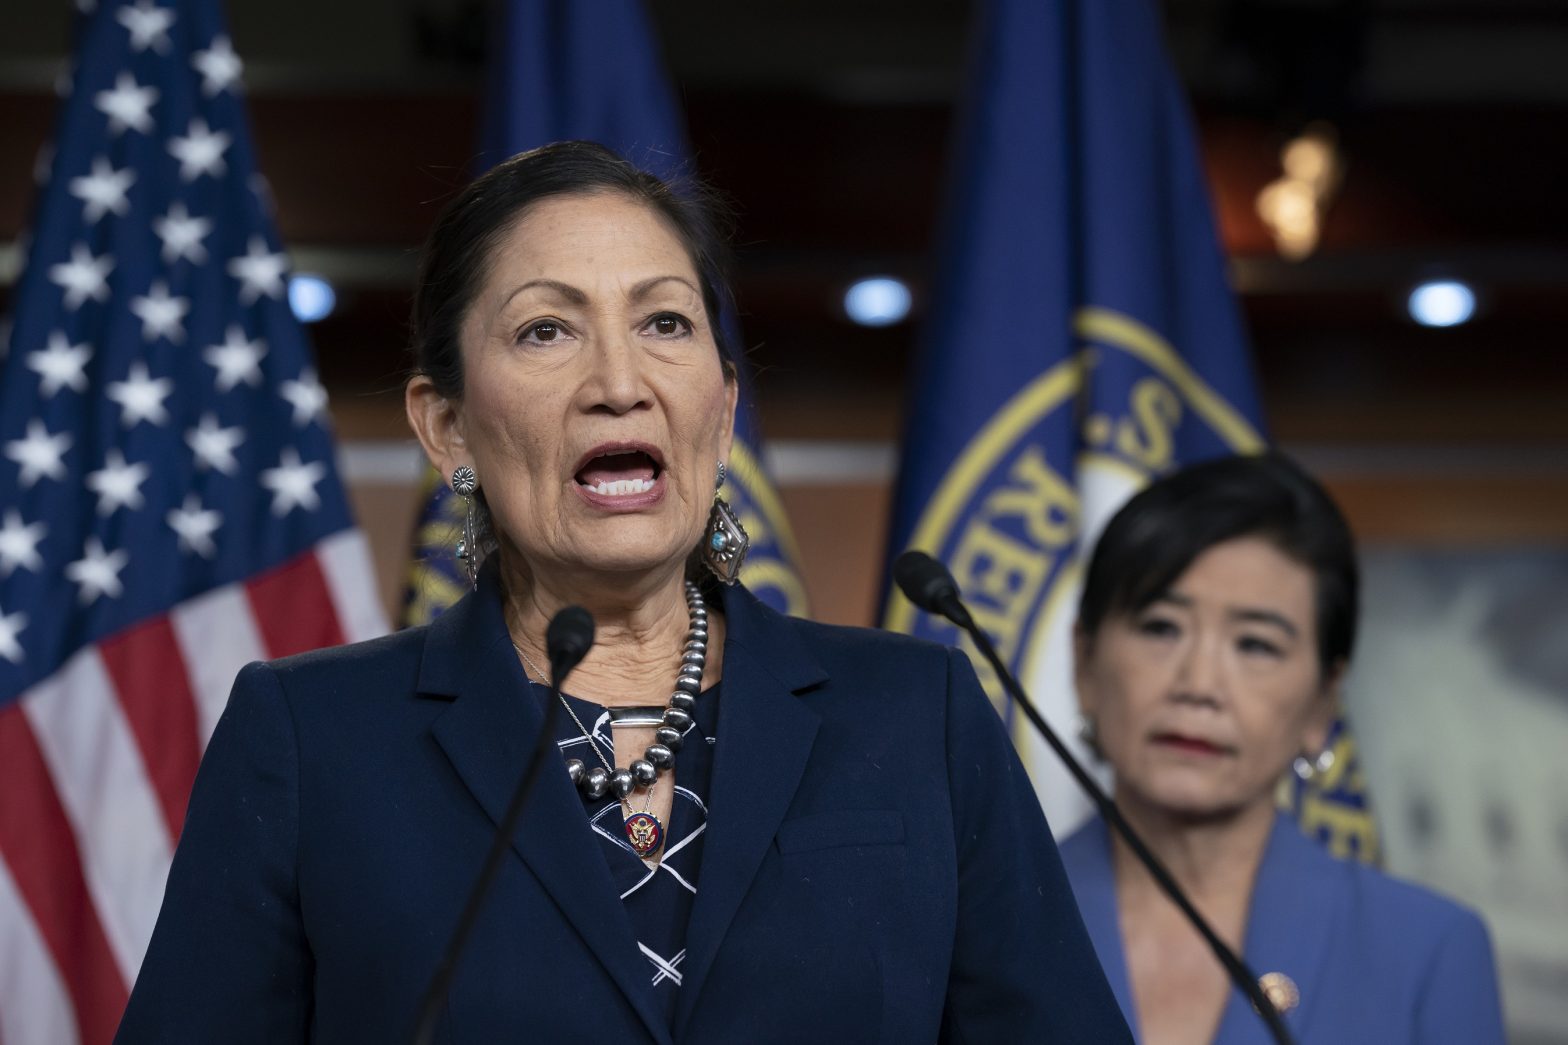 Interior Nominee Haaland Vows ‘Balance’ on Energy, Climate